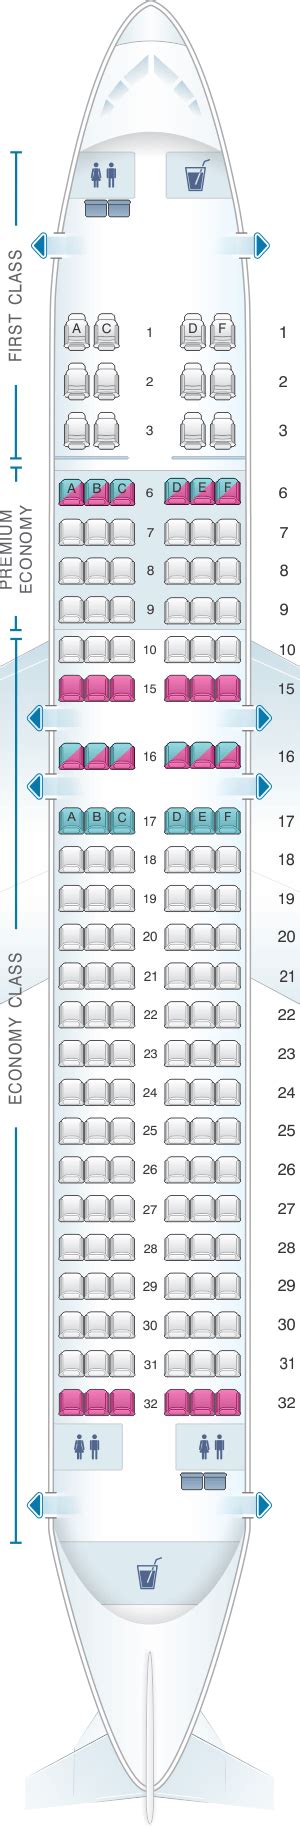 Airbus A320 Seating Chart Alaska Review Home Decor